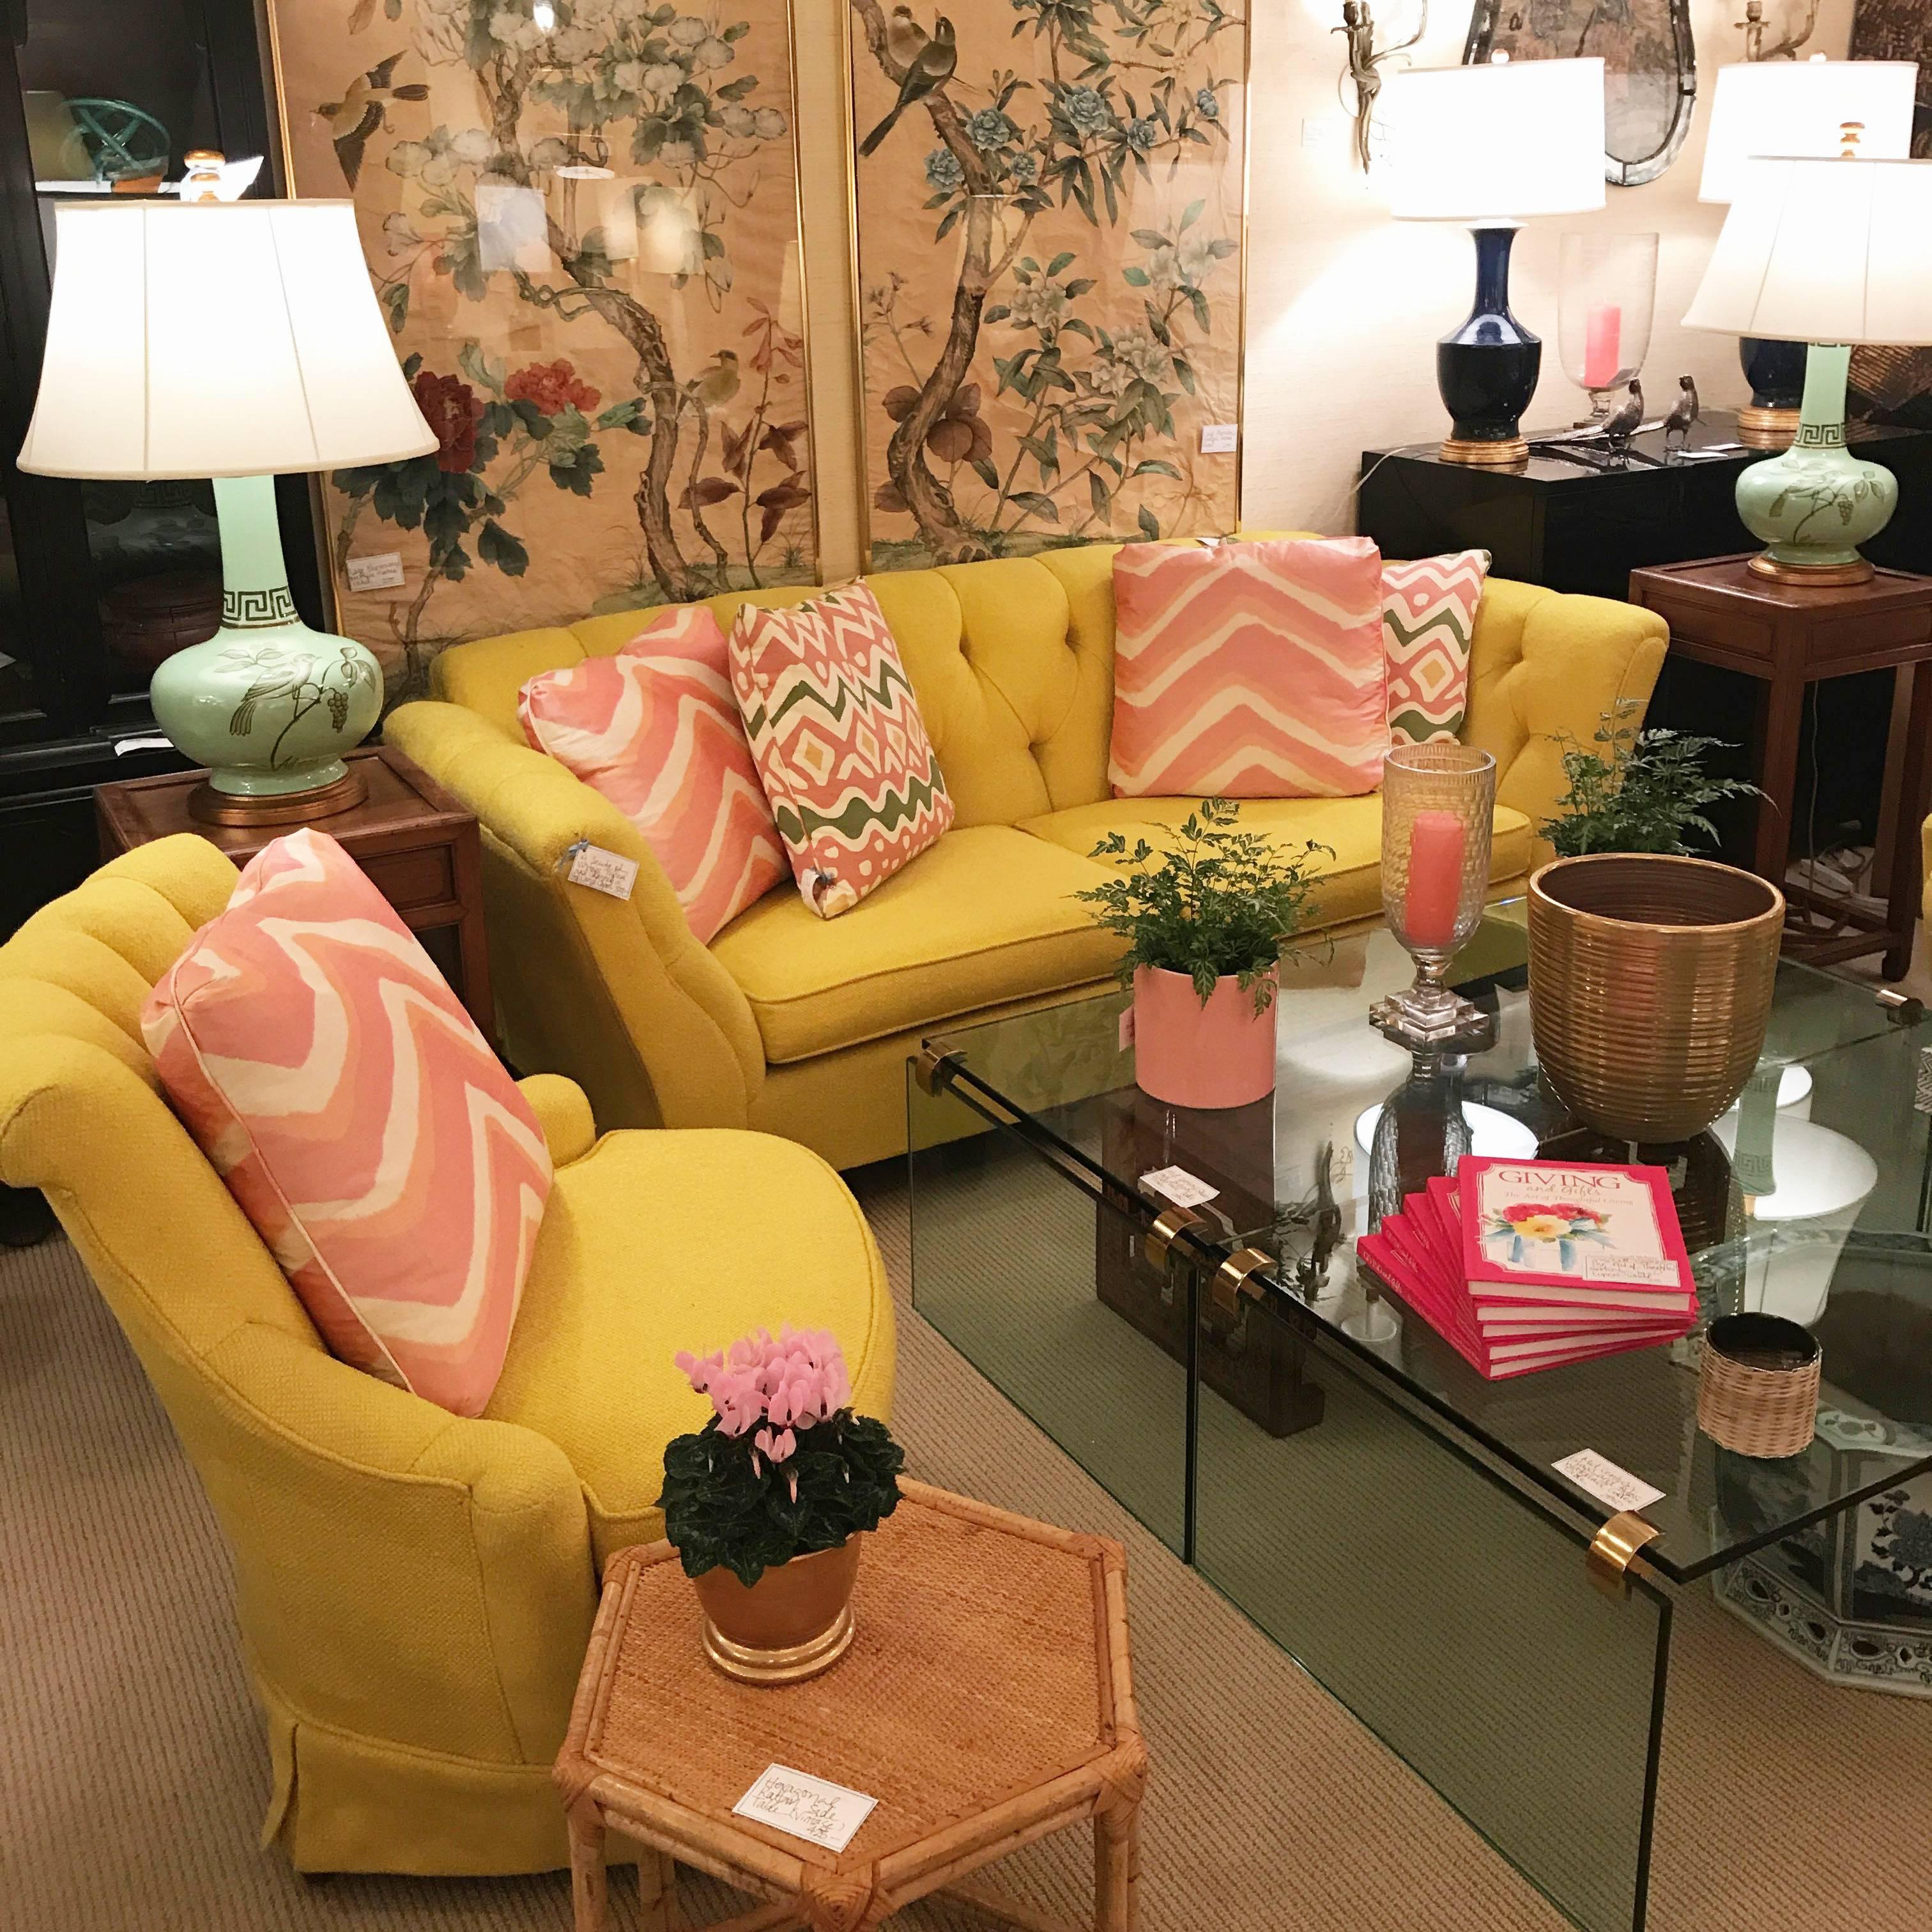 Vintage tufted and channelled sofa upholstered in a vivid yellow. From an estate on Long Island's Gold Coast.